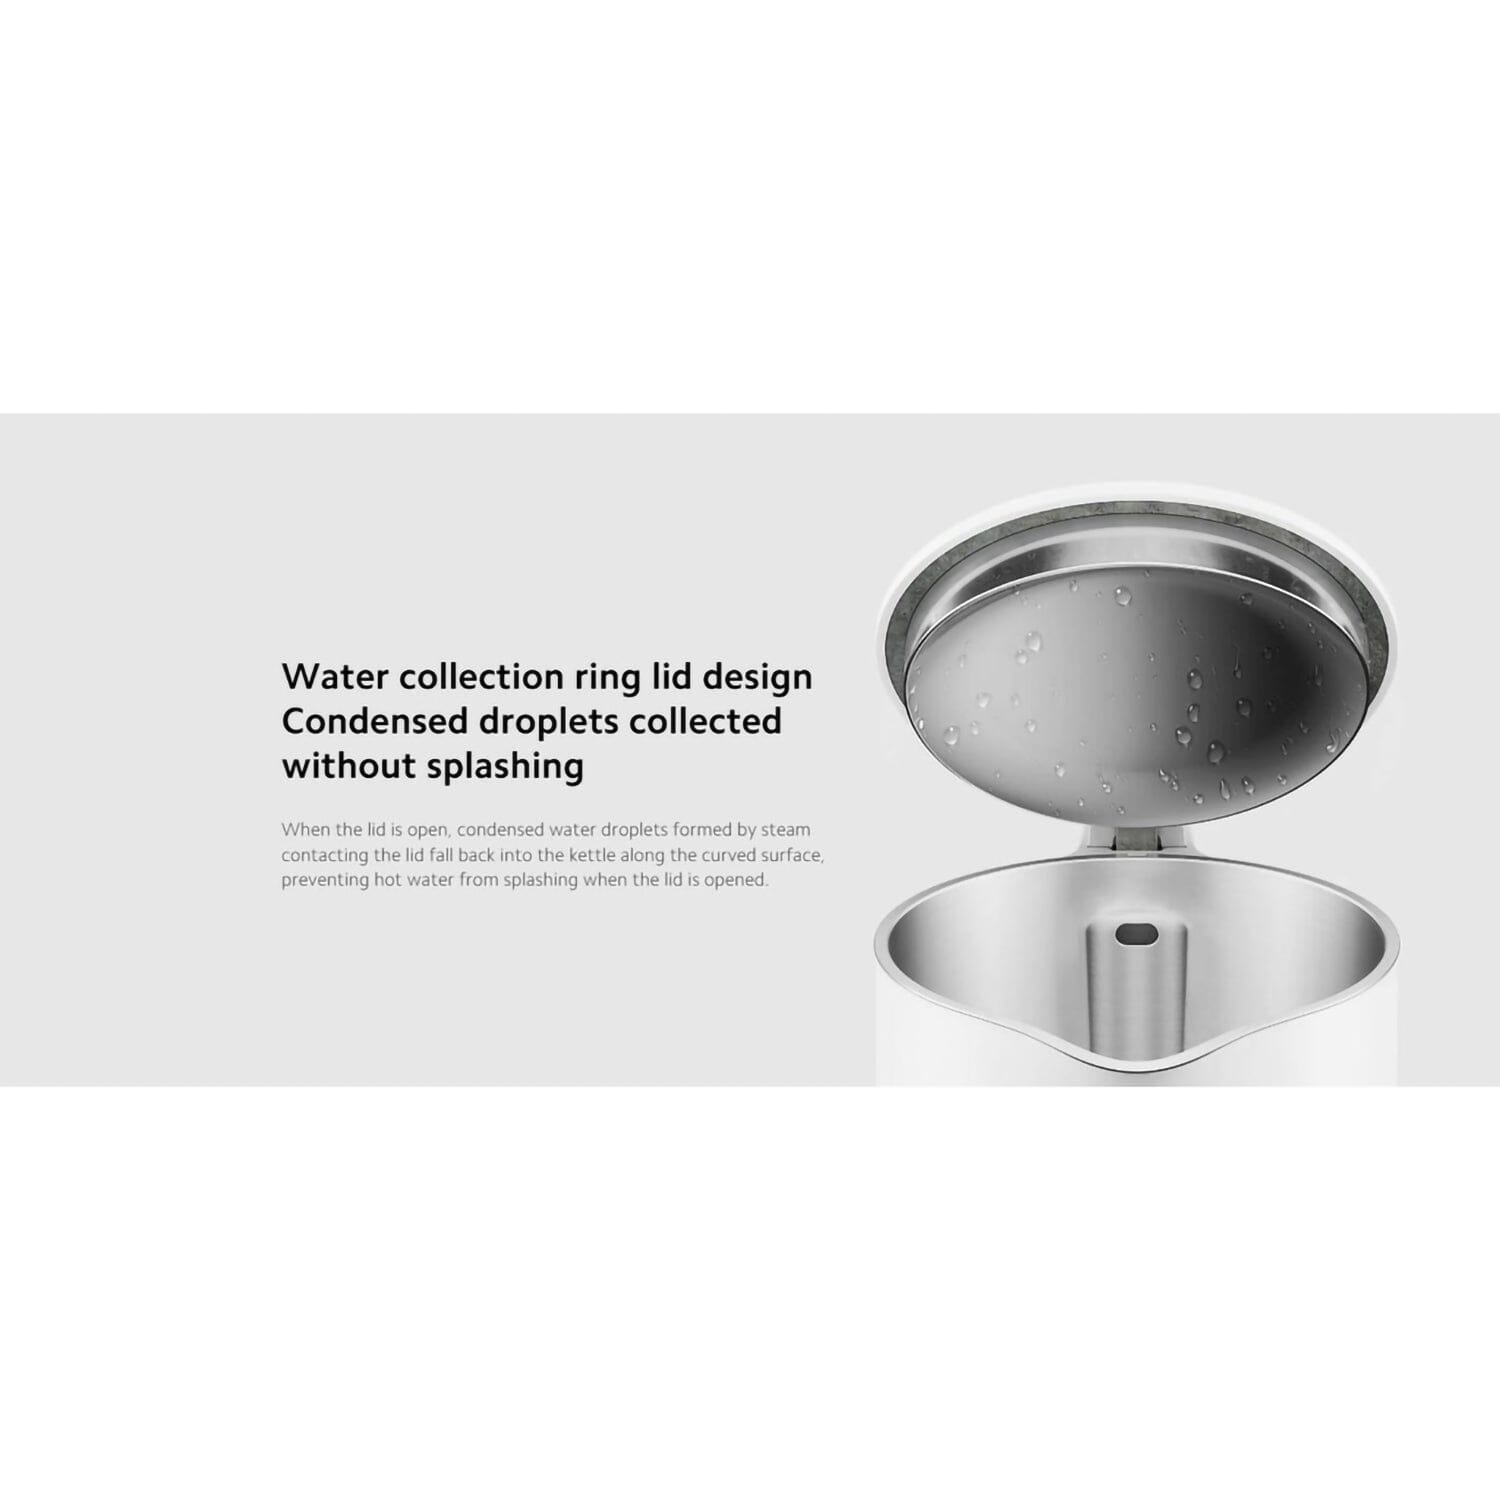 Xiaomi Mi Electric Kettle 2 Upgraded 1.7L high capacity up to 8 cups | 1800W , 304 stainless steel [Local Official Warranty] Xiaomi 